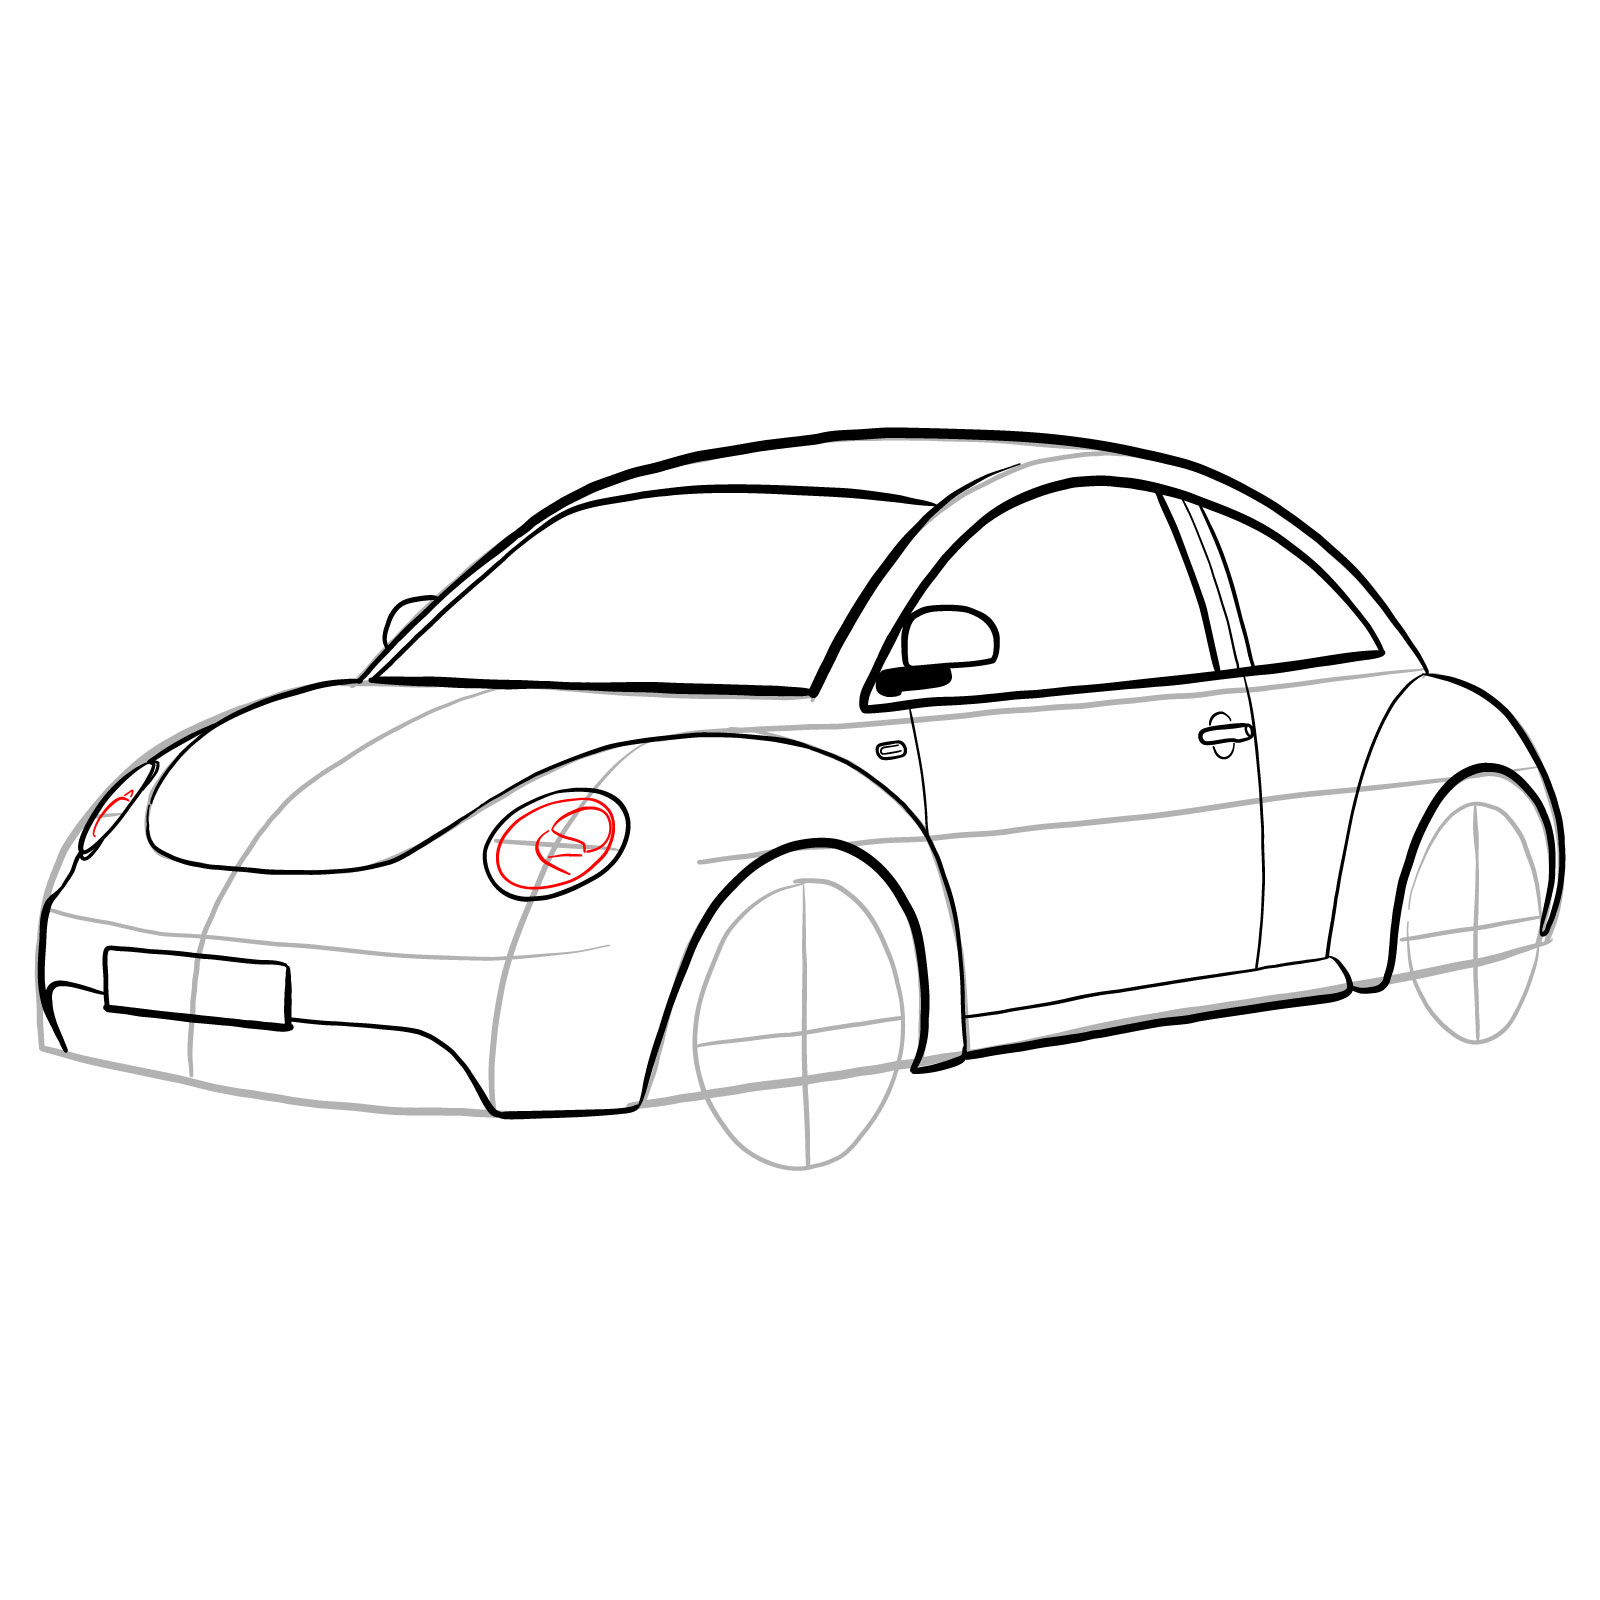 How to draw Volkswagen New Beetle - step 21